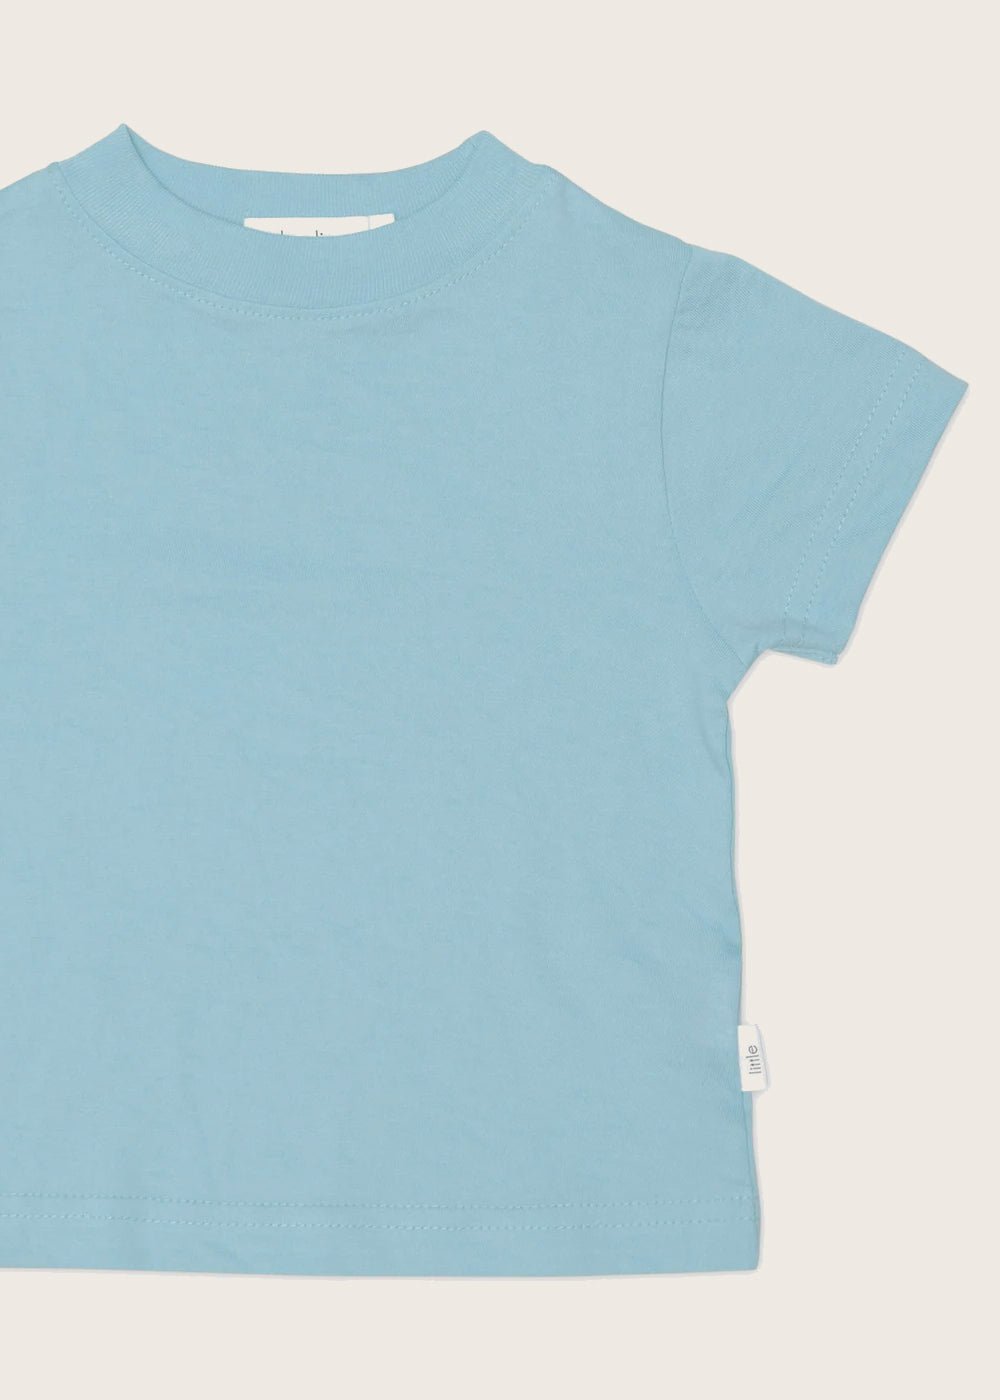 Little Elinor by NICO Powder Blue Baby Tee - New Classics Studios Sustainable Ethical Fashion Canada